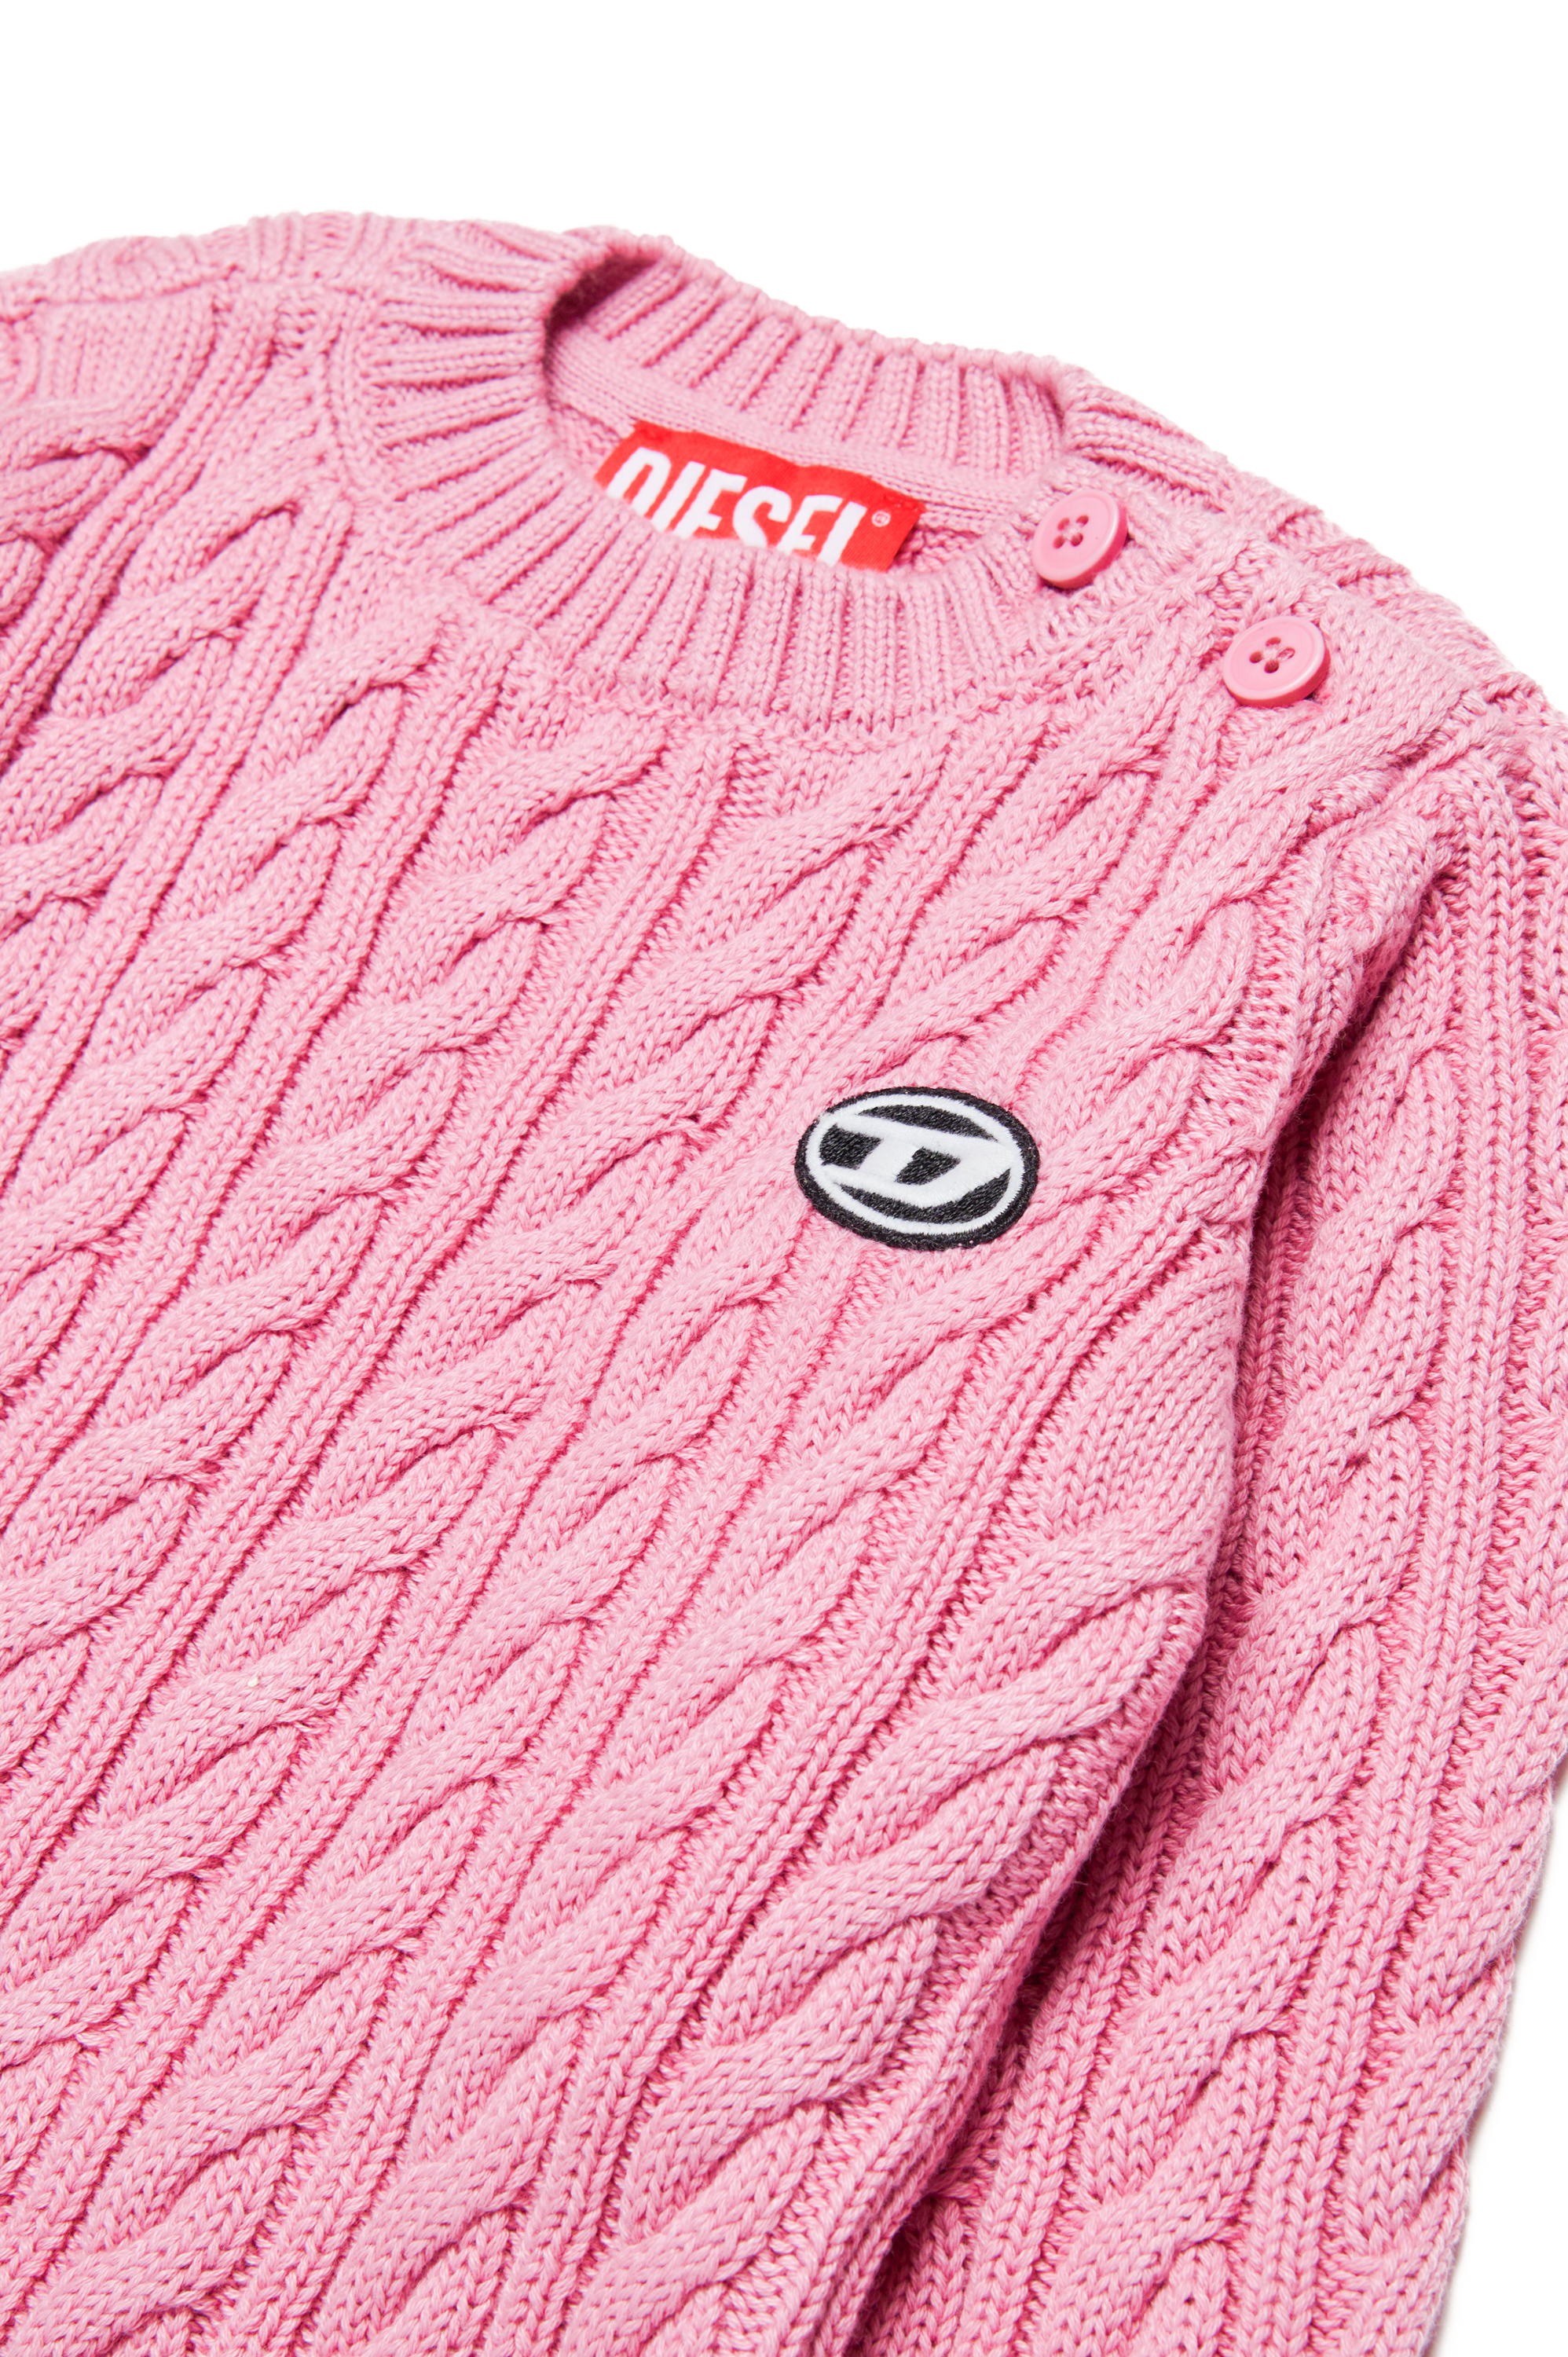 Diesel - KBAMBYB, Unisex Pullover aus Baumwolle mit Oval D-Patch in Rosa - Image 3